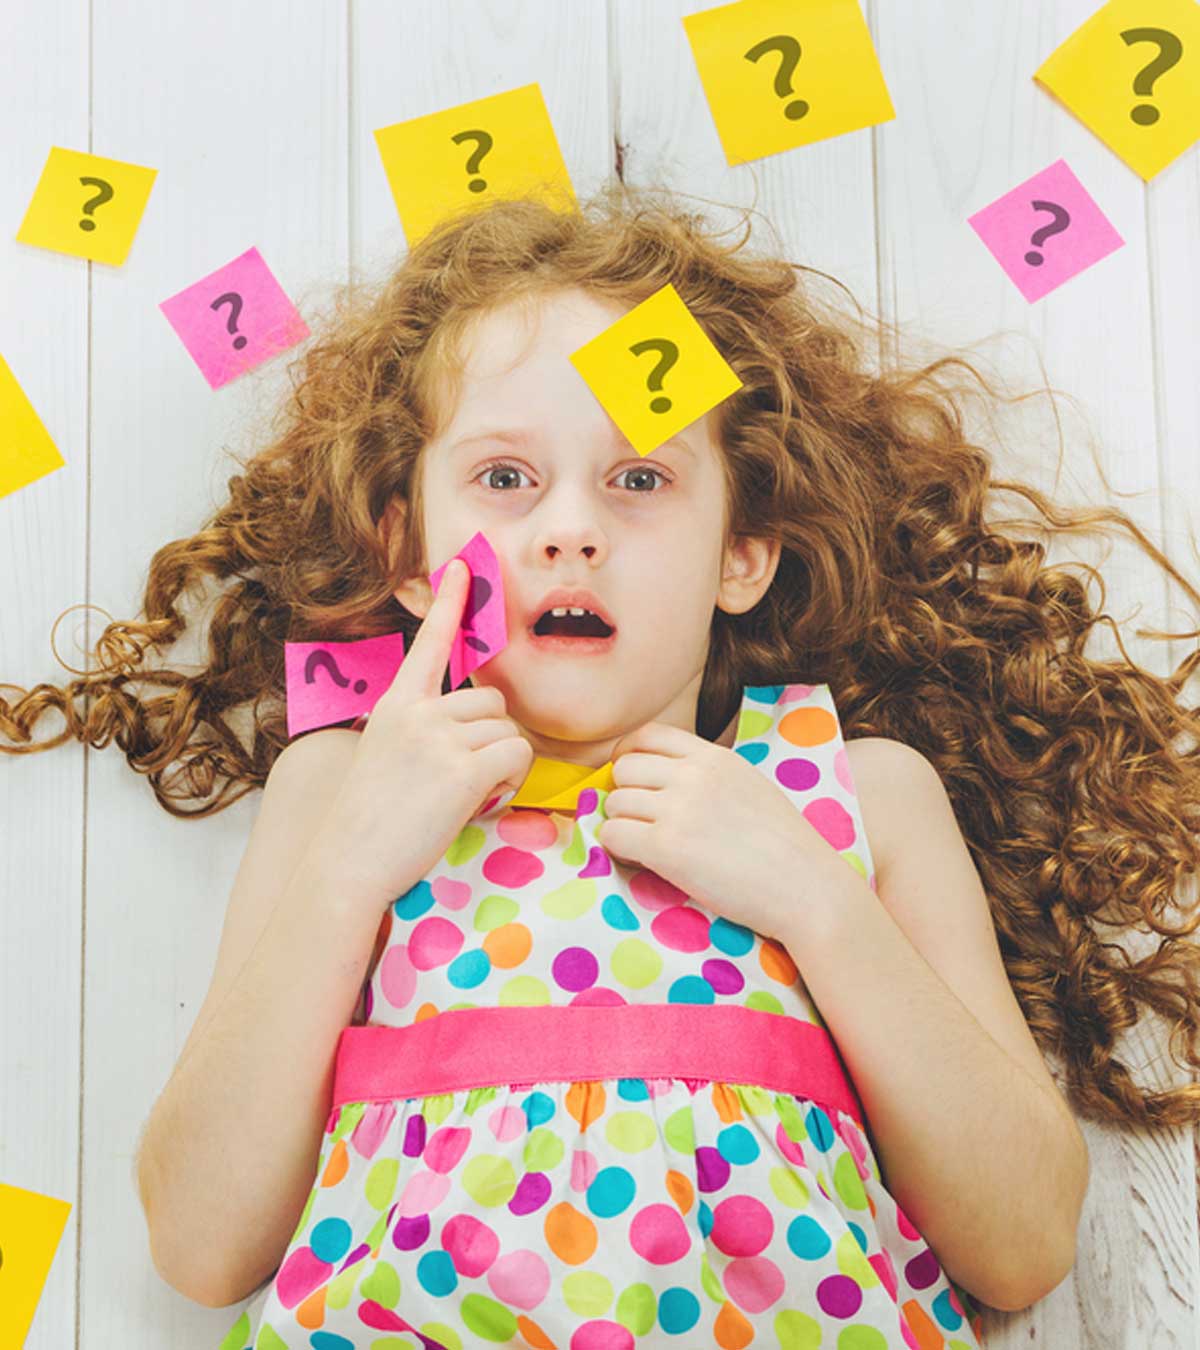 100+ Fun & Interesting Never-Have-I-Ever Questions For Kids